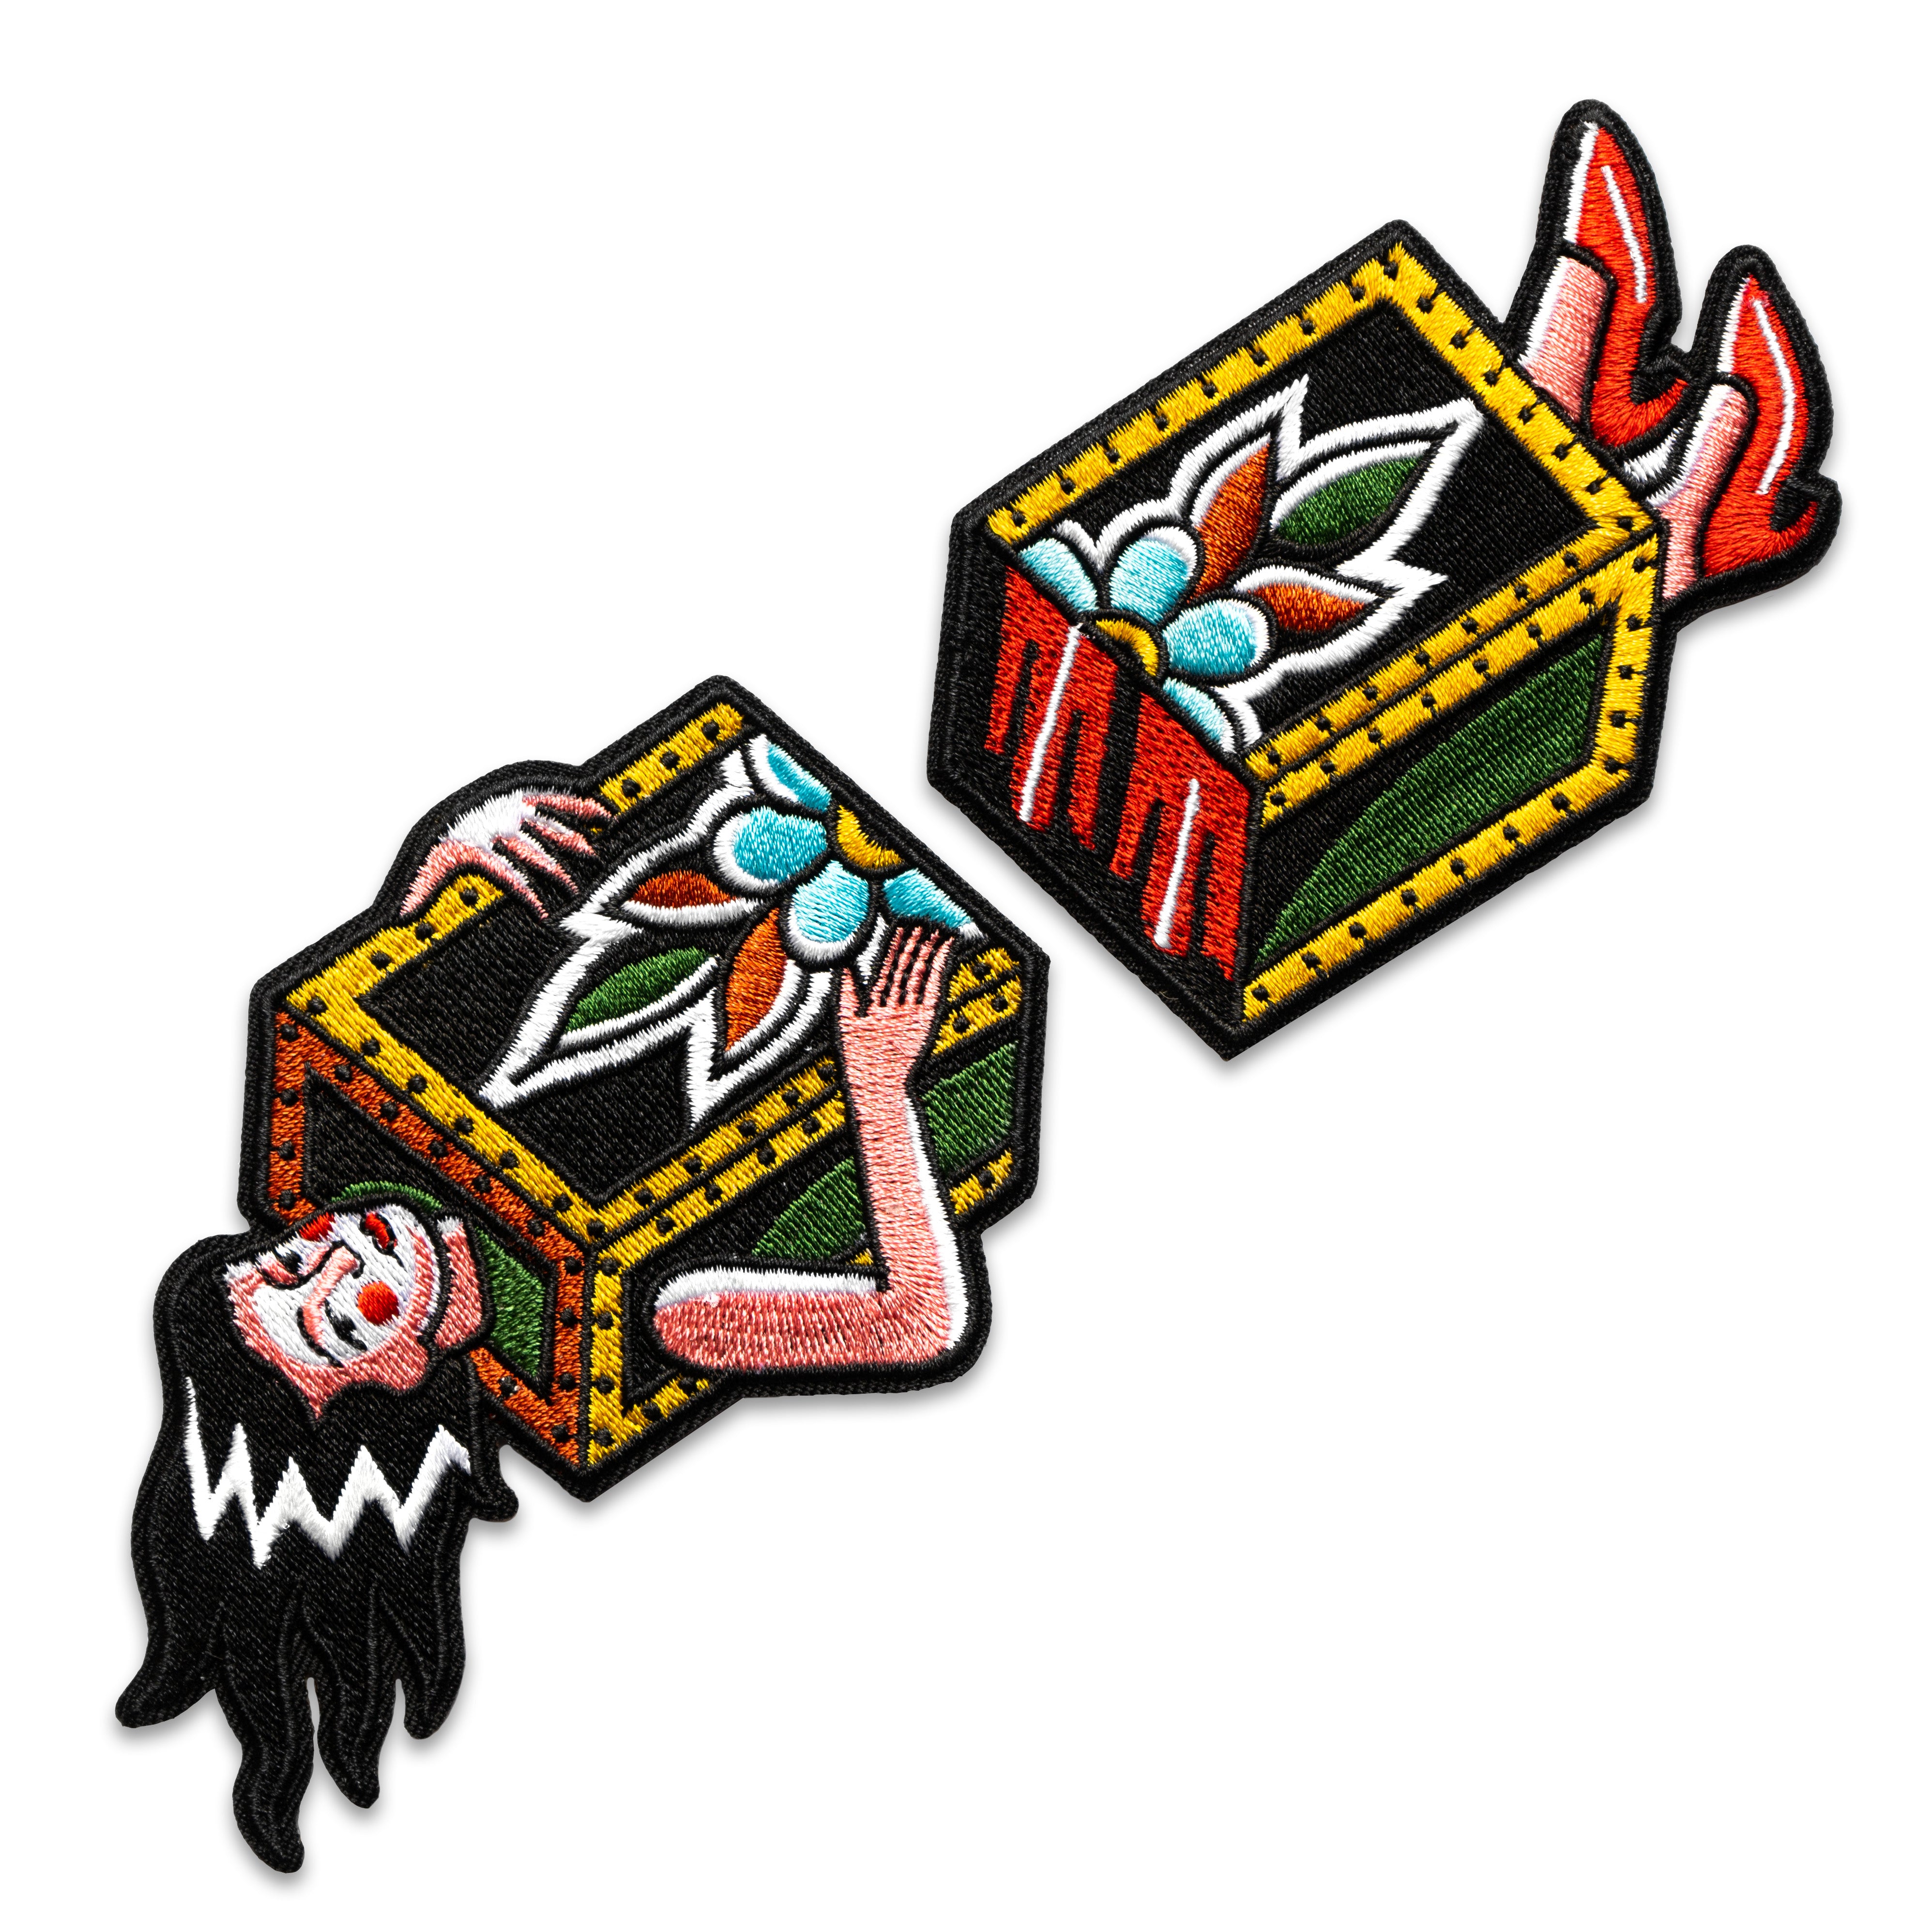 A two-part patch designed in collaboration with Brandon Ing. The iron-on patch depicts the traditional "sawing in half" magic trick. One half is woman's torso in a box, the other half is her feet. Patch is embroidered with multiple colors, and is inspired by classic tattoo flash designs.